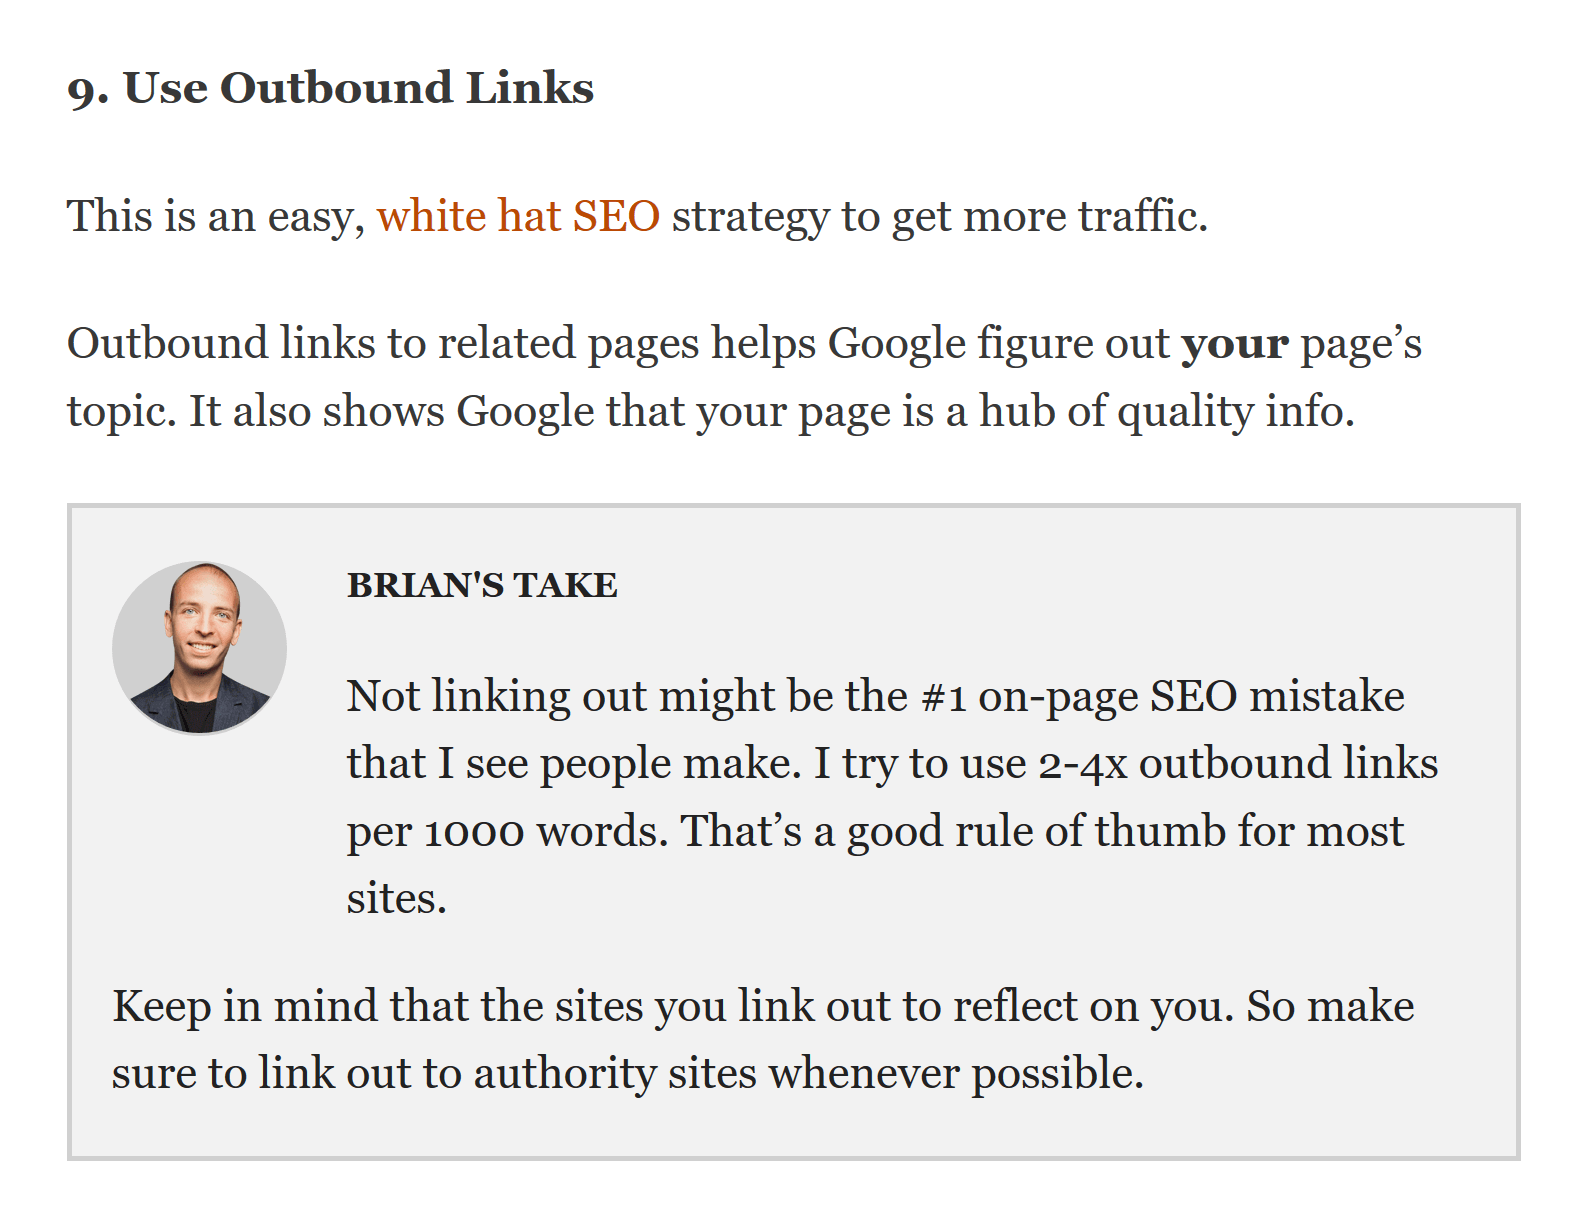 Brian Dean quote one of the biggest on-page SEO mistakes is not linking out